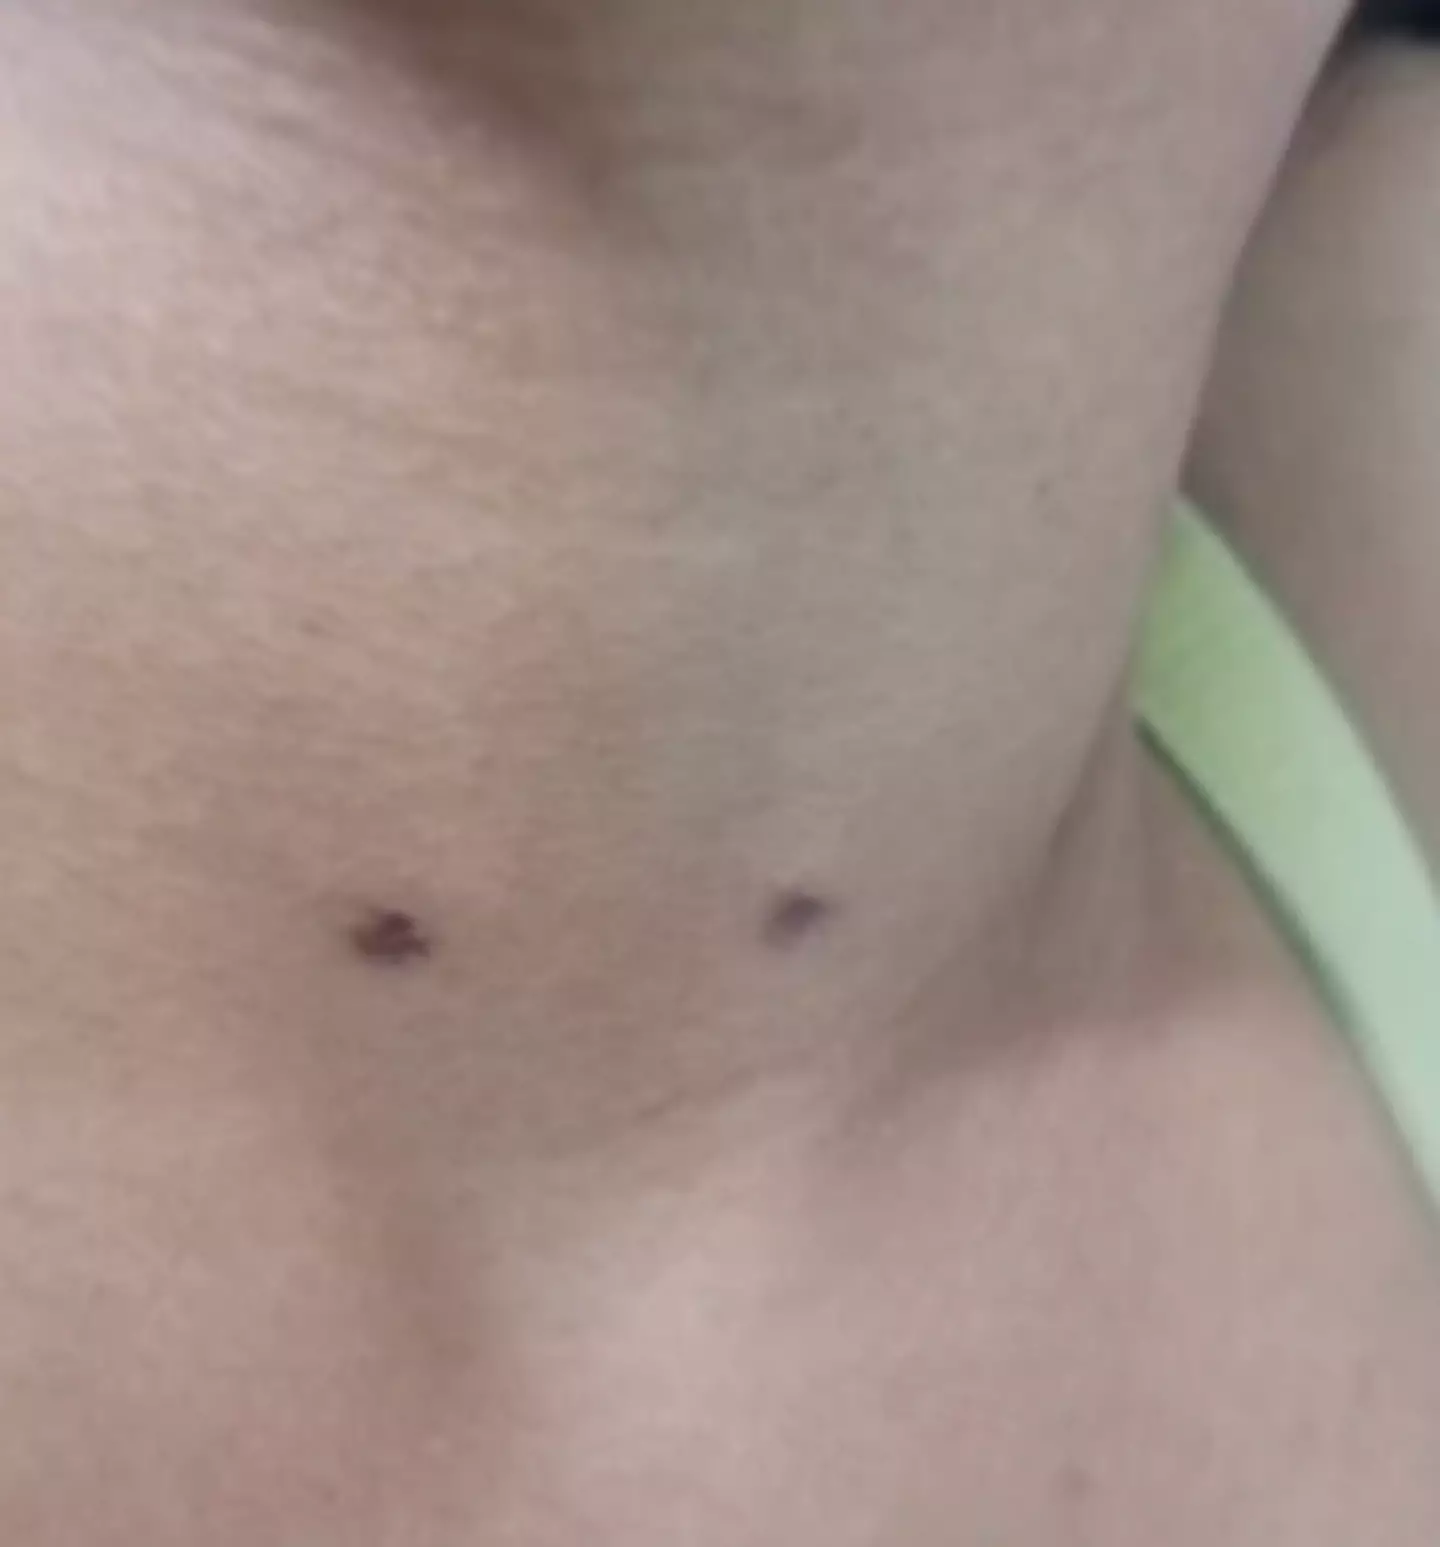 These are her the marks on her daughter's neck.